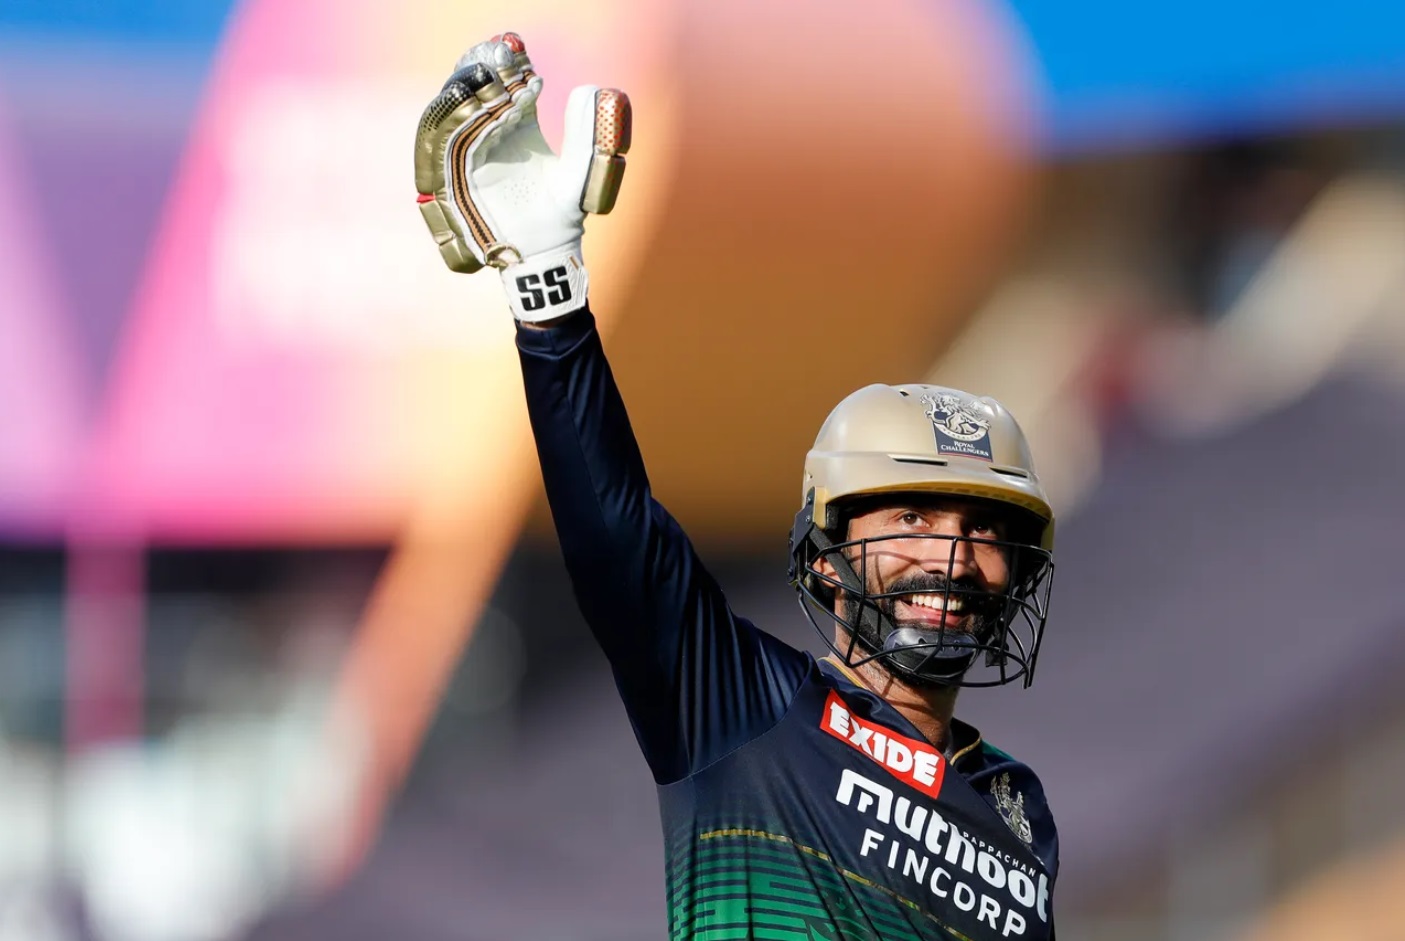 Dinesh Karthik Helmet: Why is Dinesh Karthik donning a DIFFERENT helmet compared to other batters? Check OUT Team India, ICC T20 World Cup, ICC T20 WC, Cricket Helmet